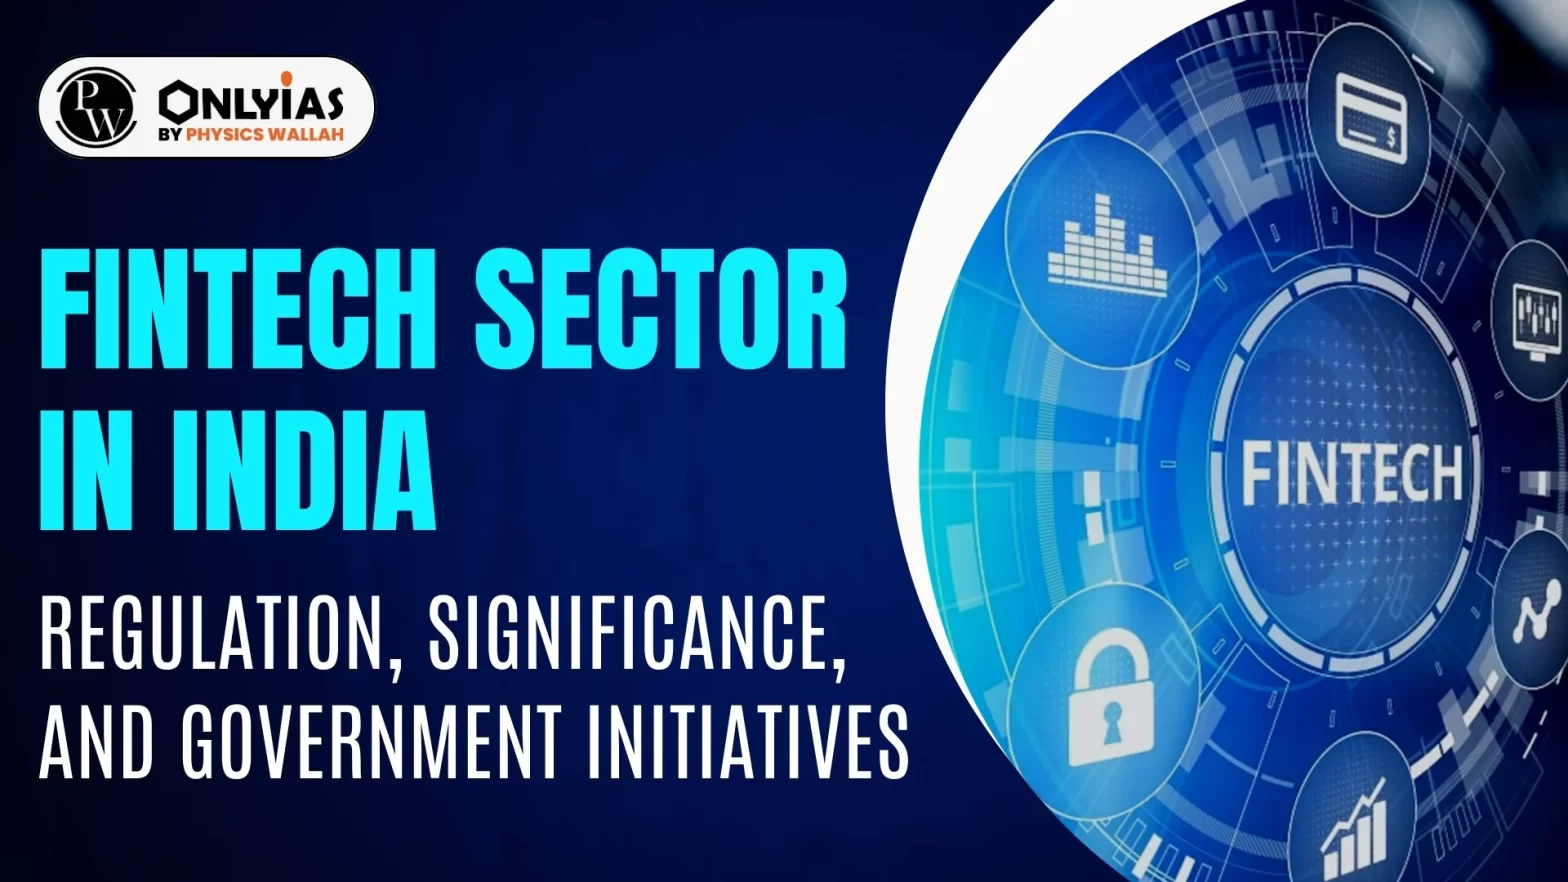 Fintech Sector in India: Regulation, Significance, and Government Initiatives